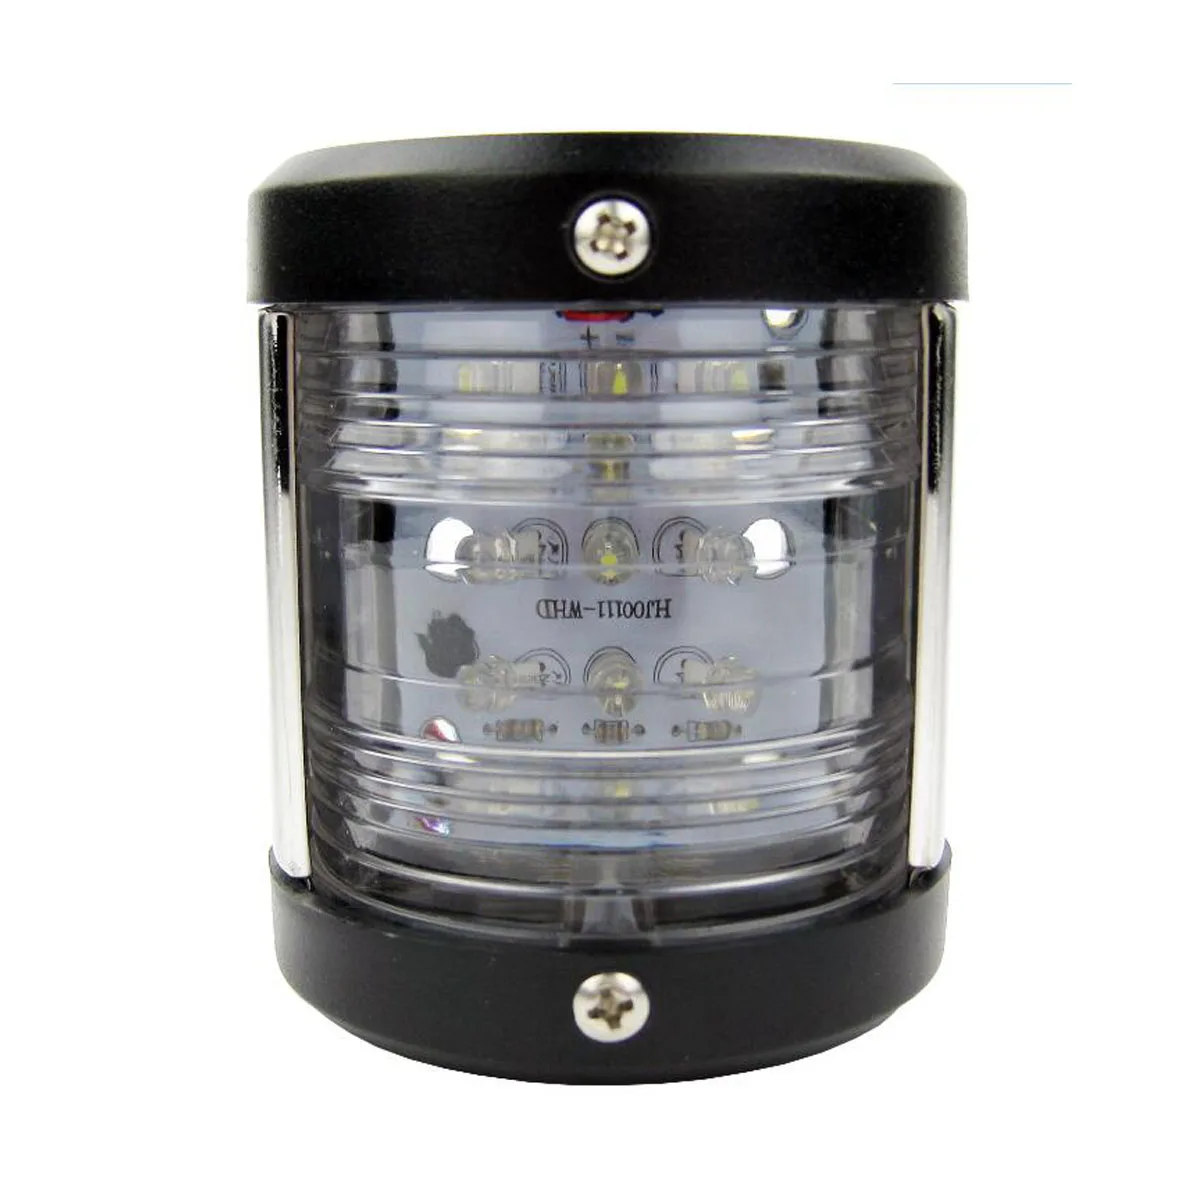 Boat Black Plastic 12V LED/Tungsten Low Side Lamp 225 Degree Waterproof Masthead and Stern Navigation White Light